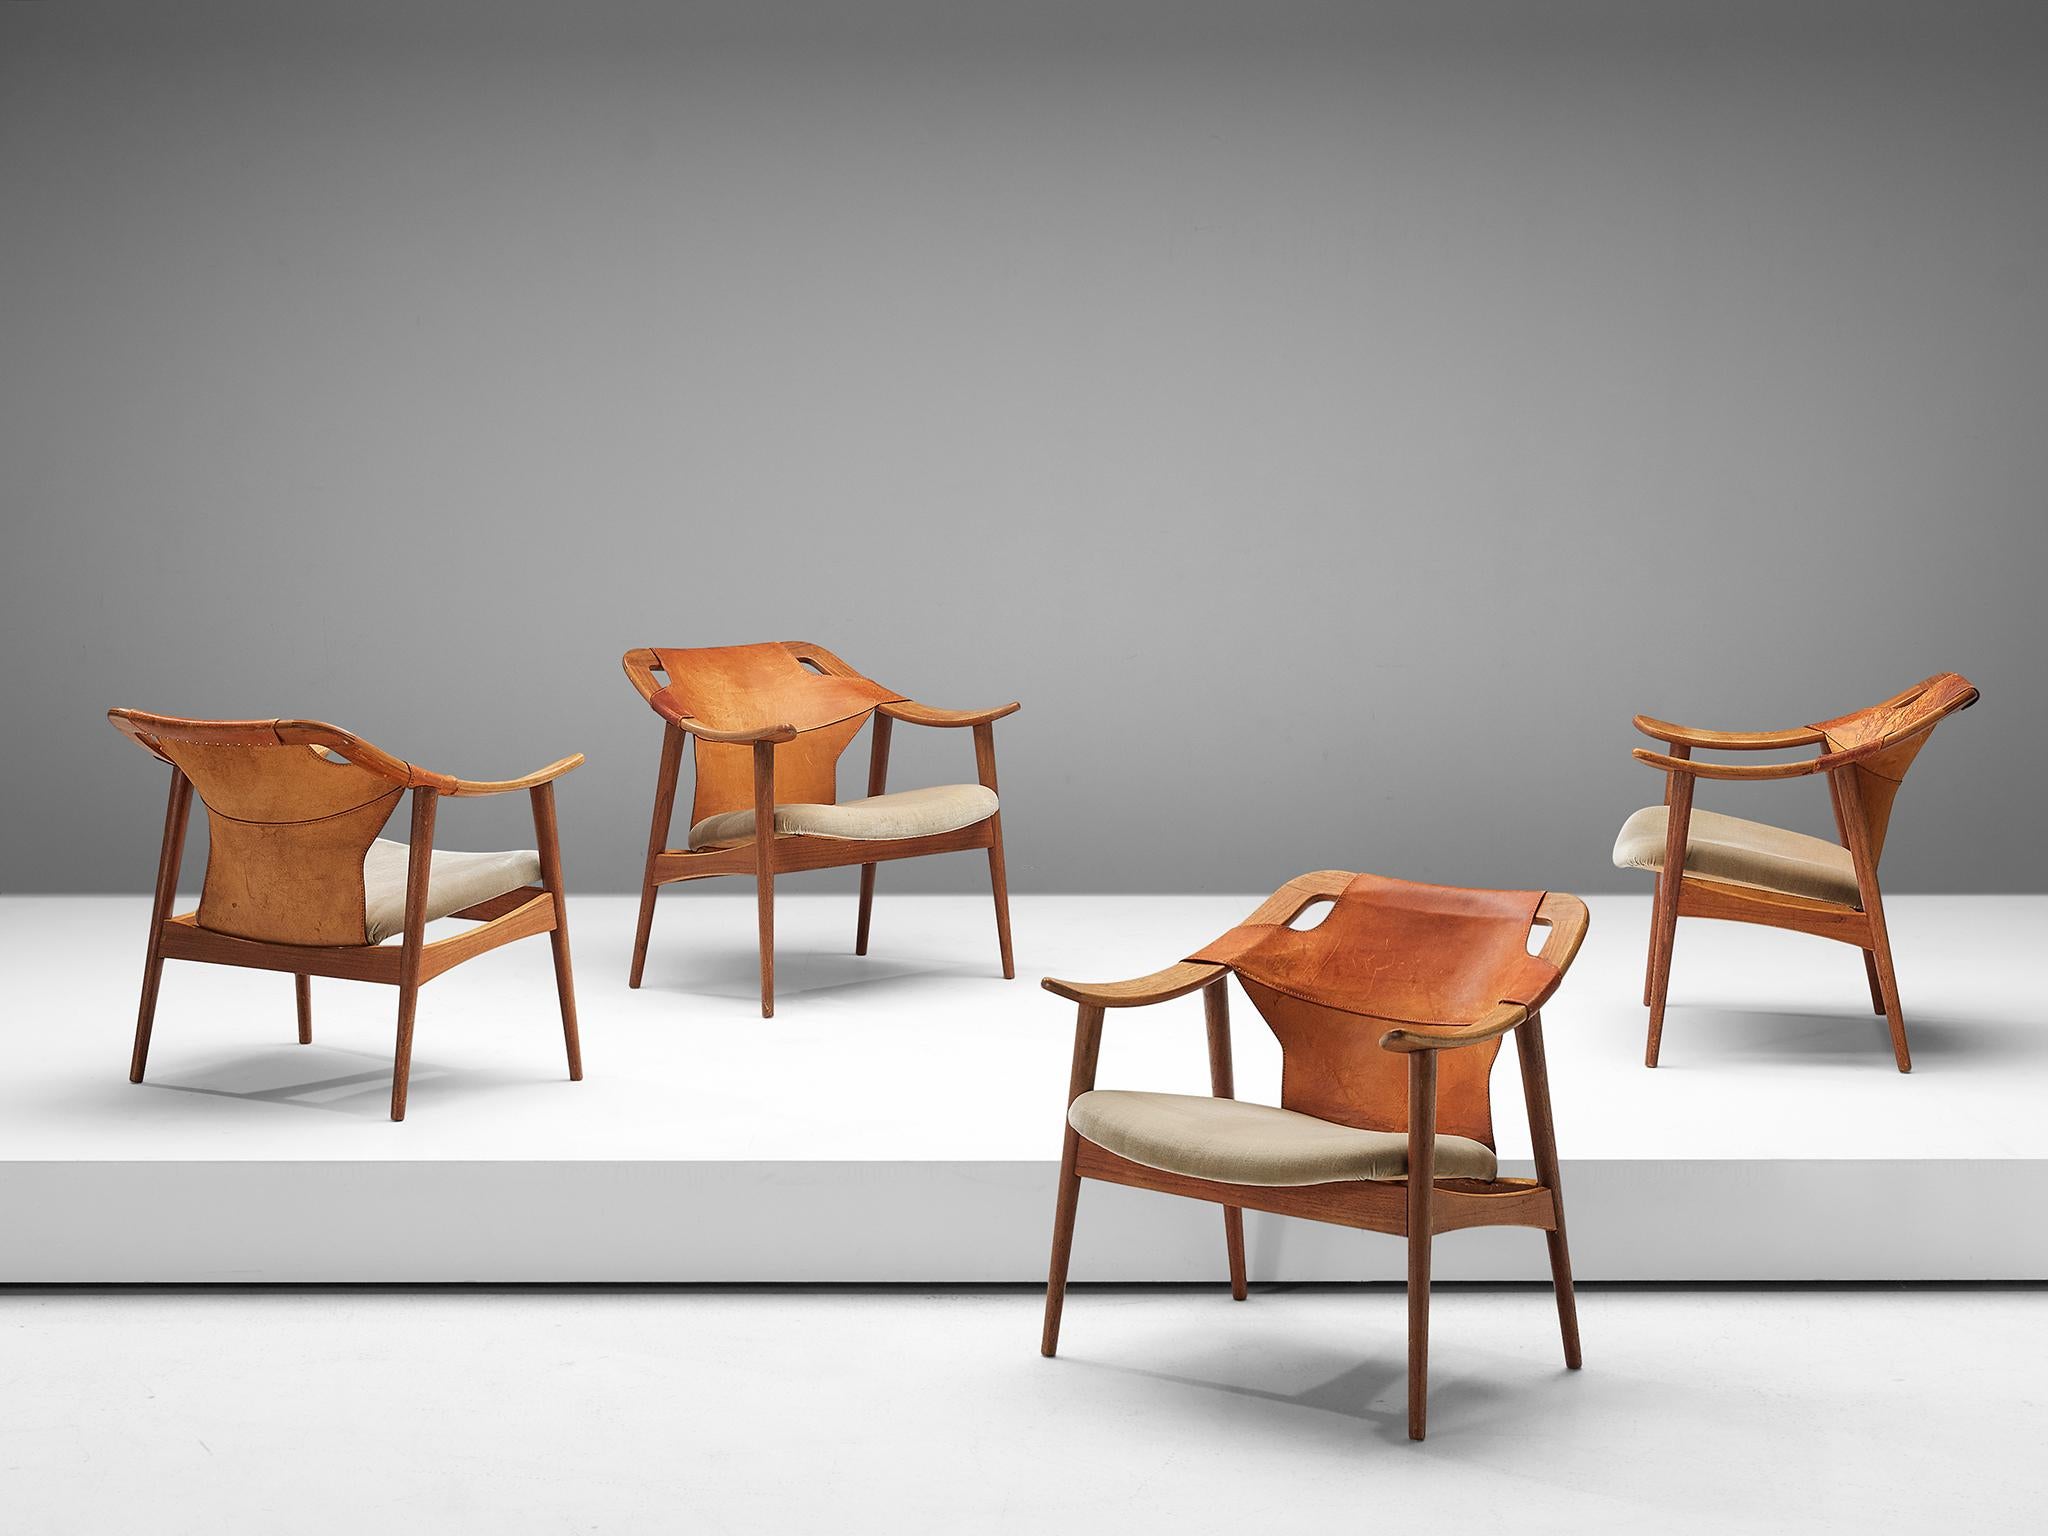 Arne Tidemand Ruud, set of four armchairs model 3050, oak, leather and fabric, Norway, 1960s. 

This easy chair is designed by Norwegian designer Arne Tidemand Ruud. This chair is very dynamic due it's design and shapes. The bended oak shows